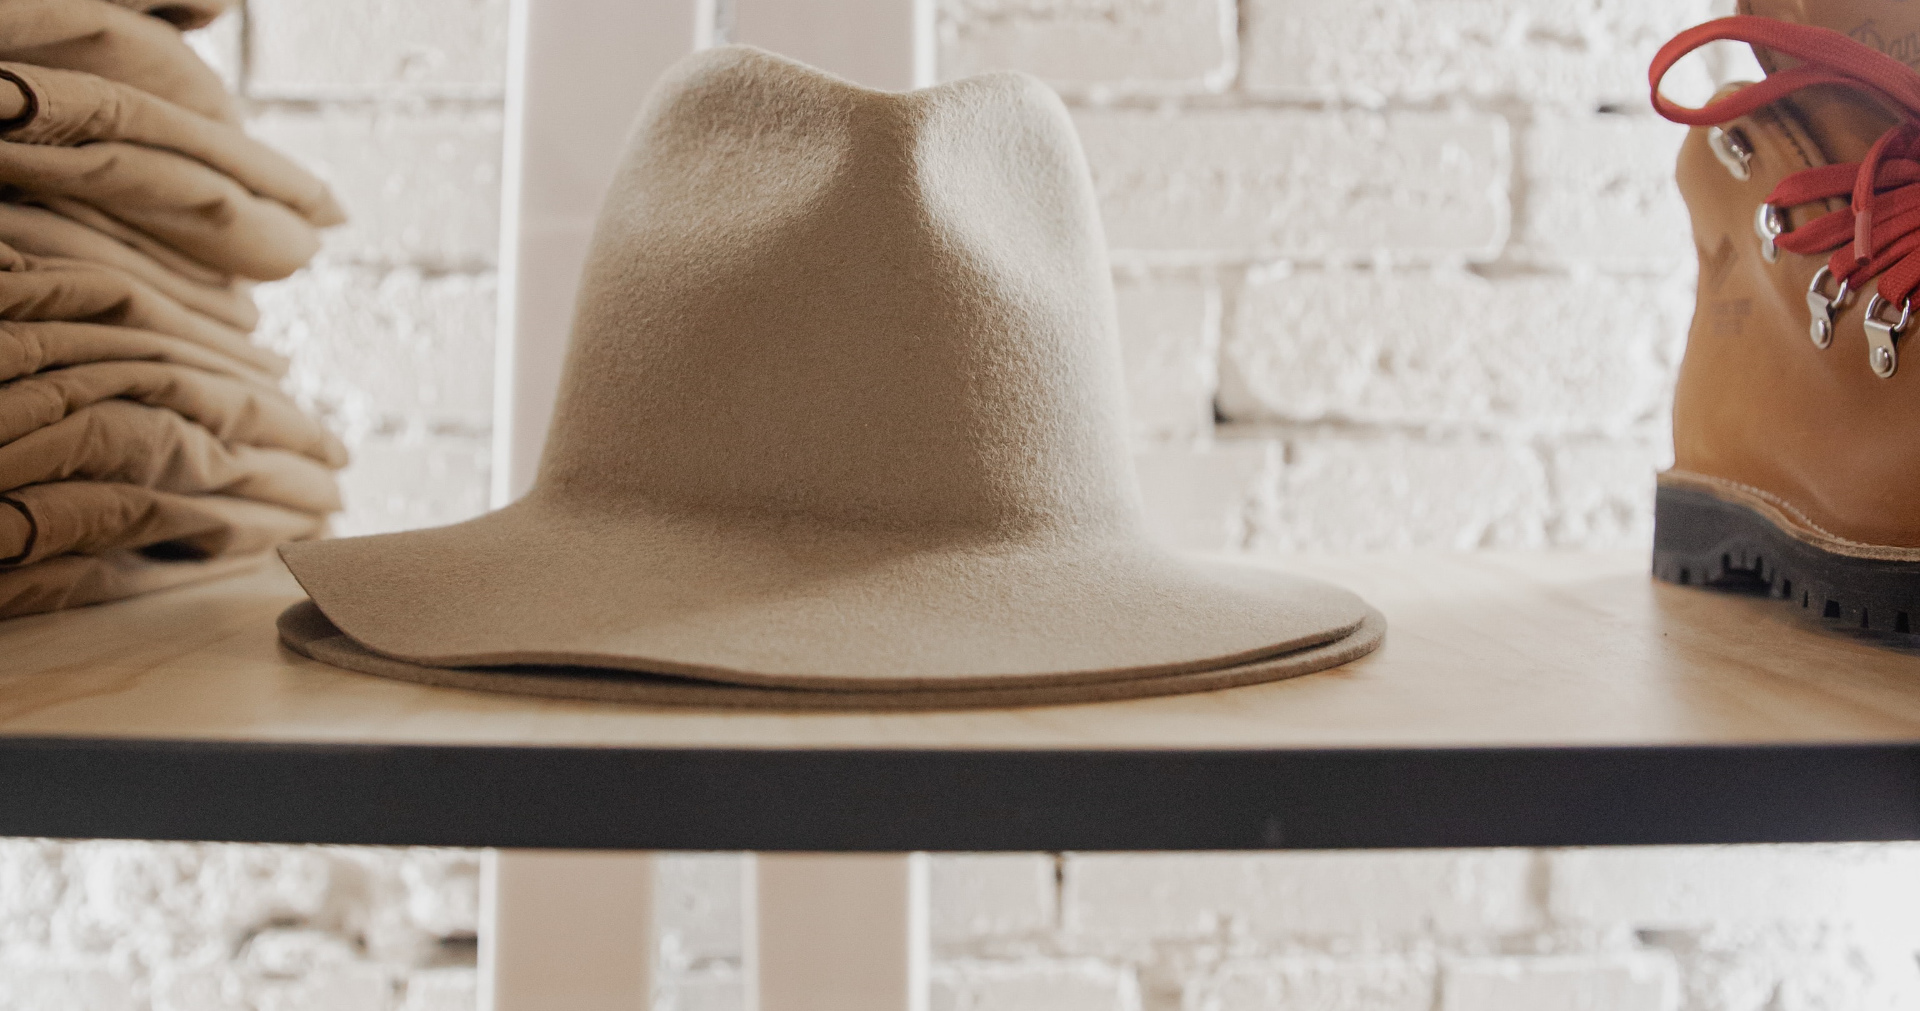 Style Trend Clothiers About Us banner featuring a wooden shelf with beige hats, bulky boots and folded tan pants and a white brick wall in the background